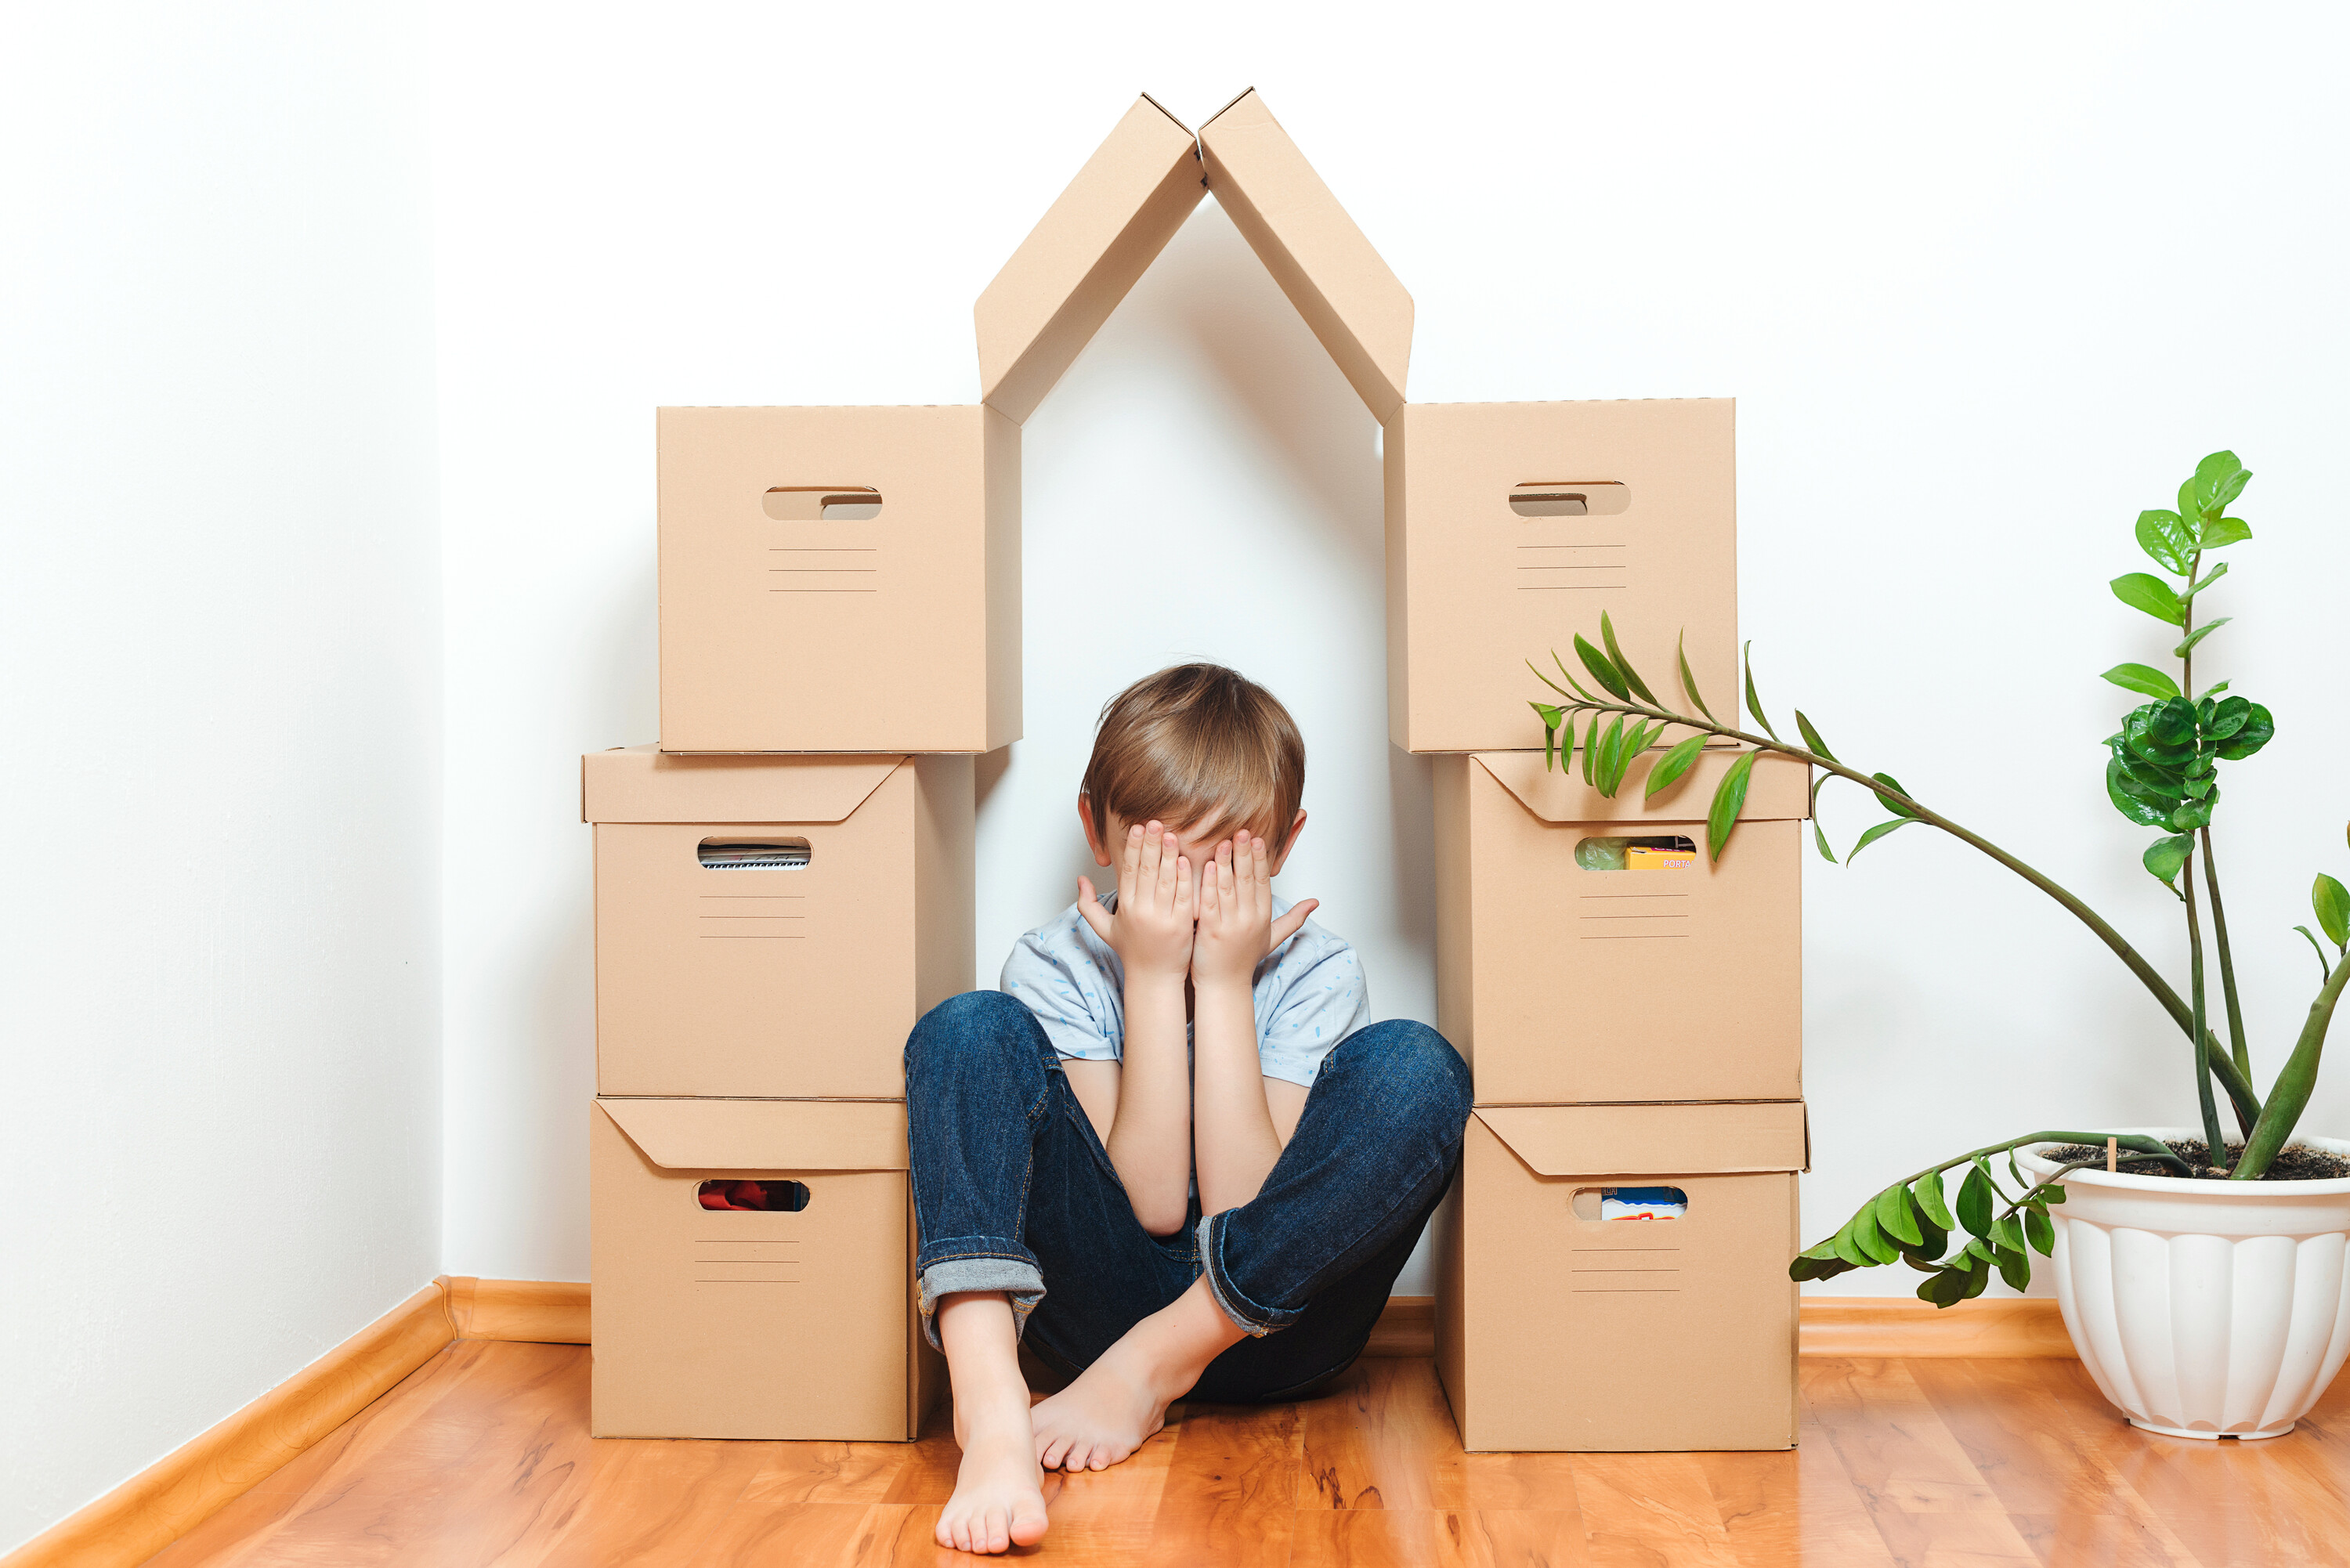 Young child with jeans and a tishirt sitting on the floor without shoes under a moving box pyramid.